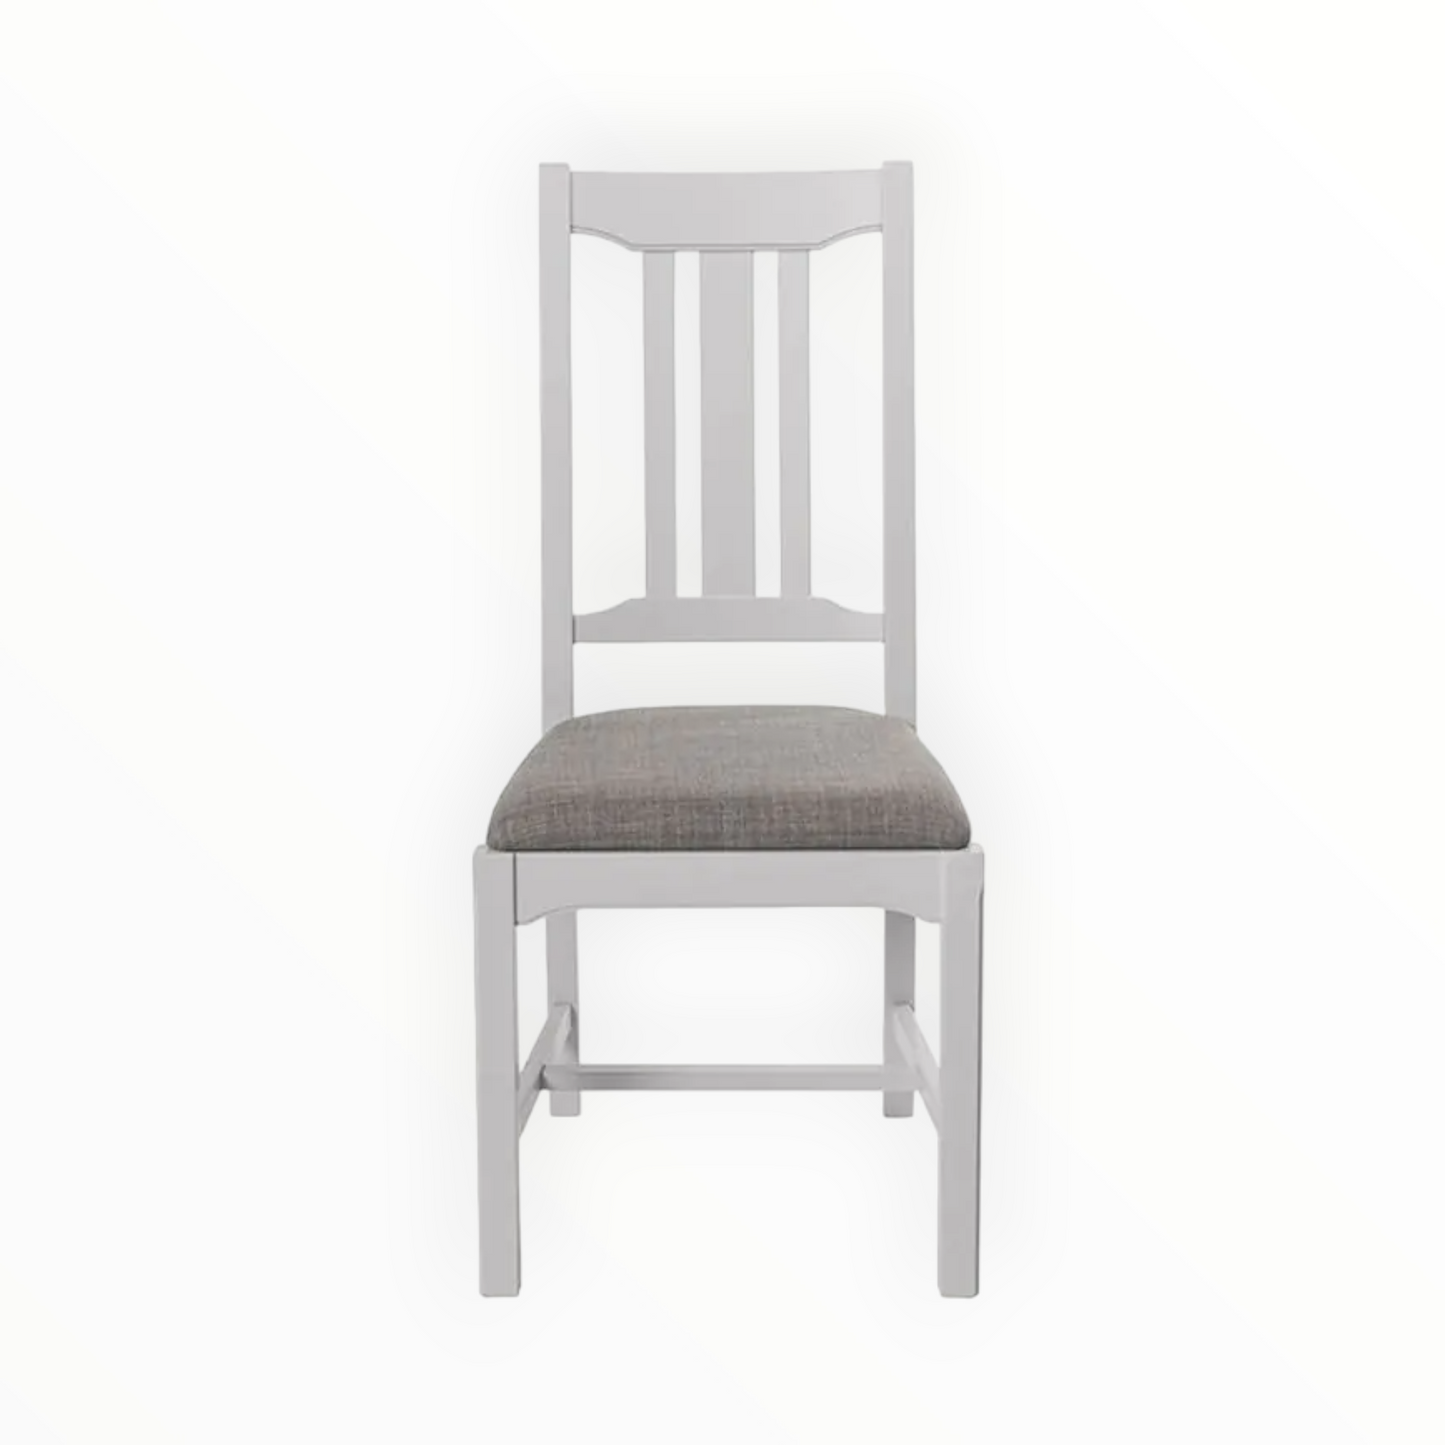 Georgetown Dining Chair